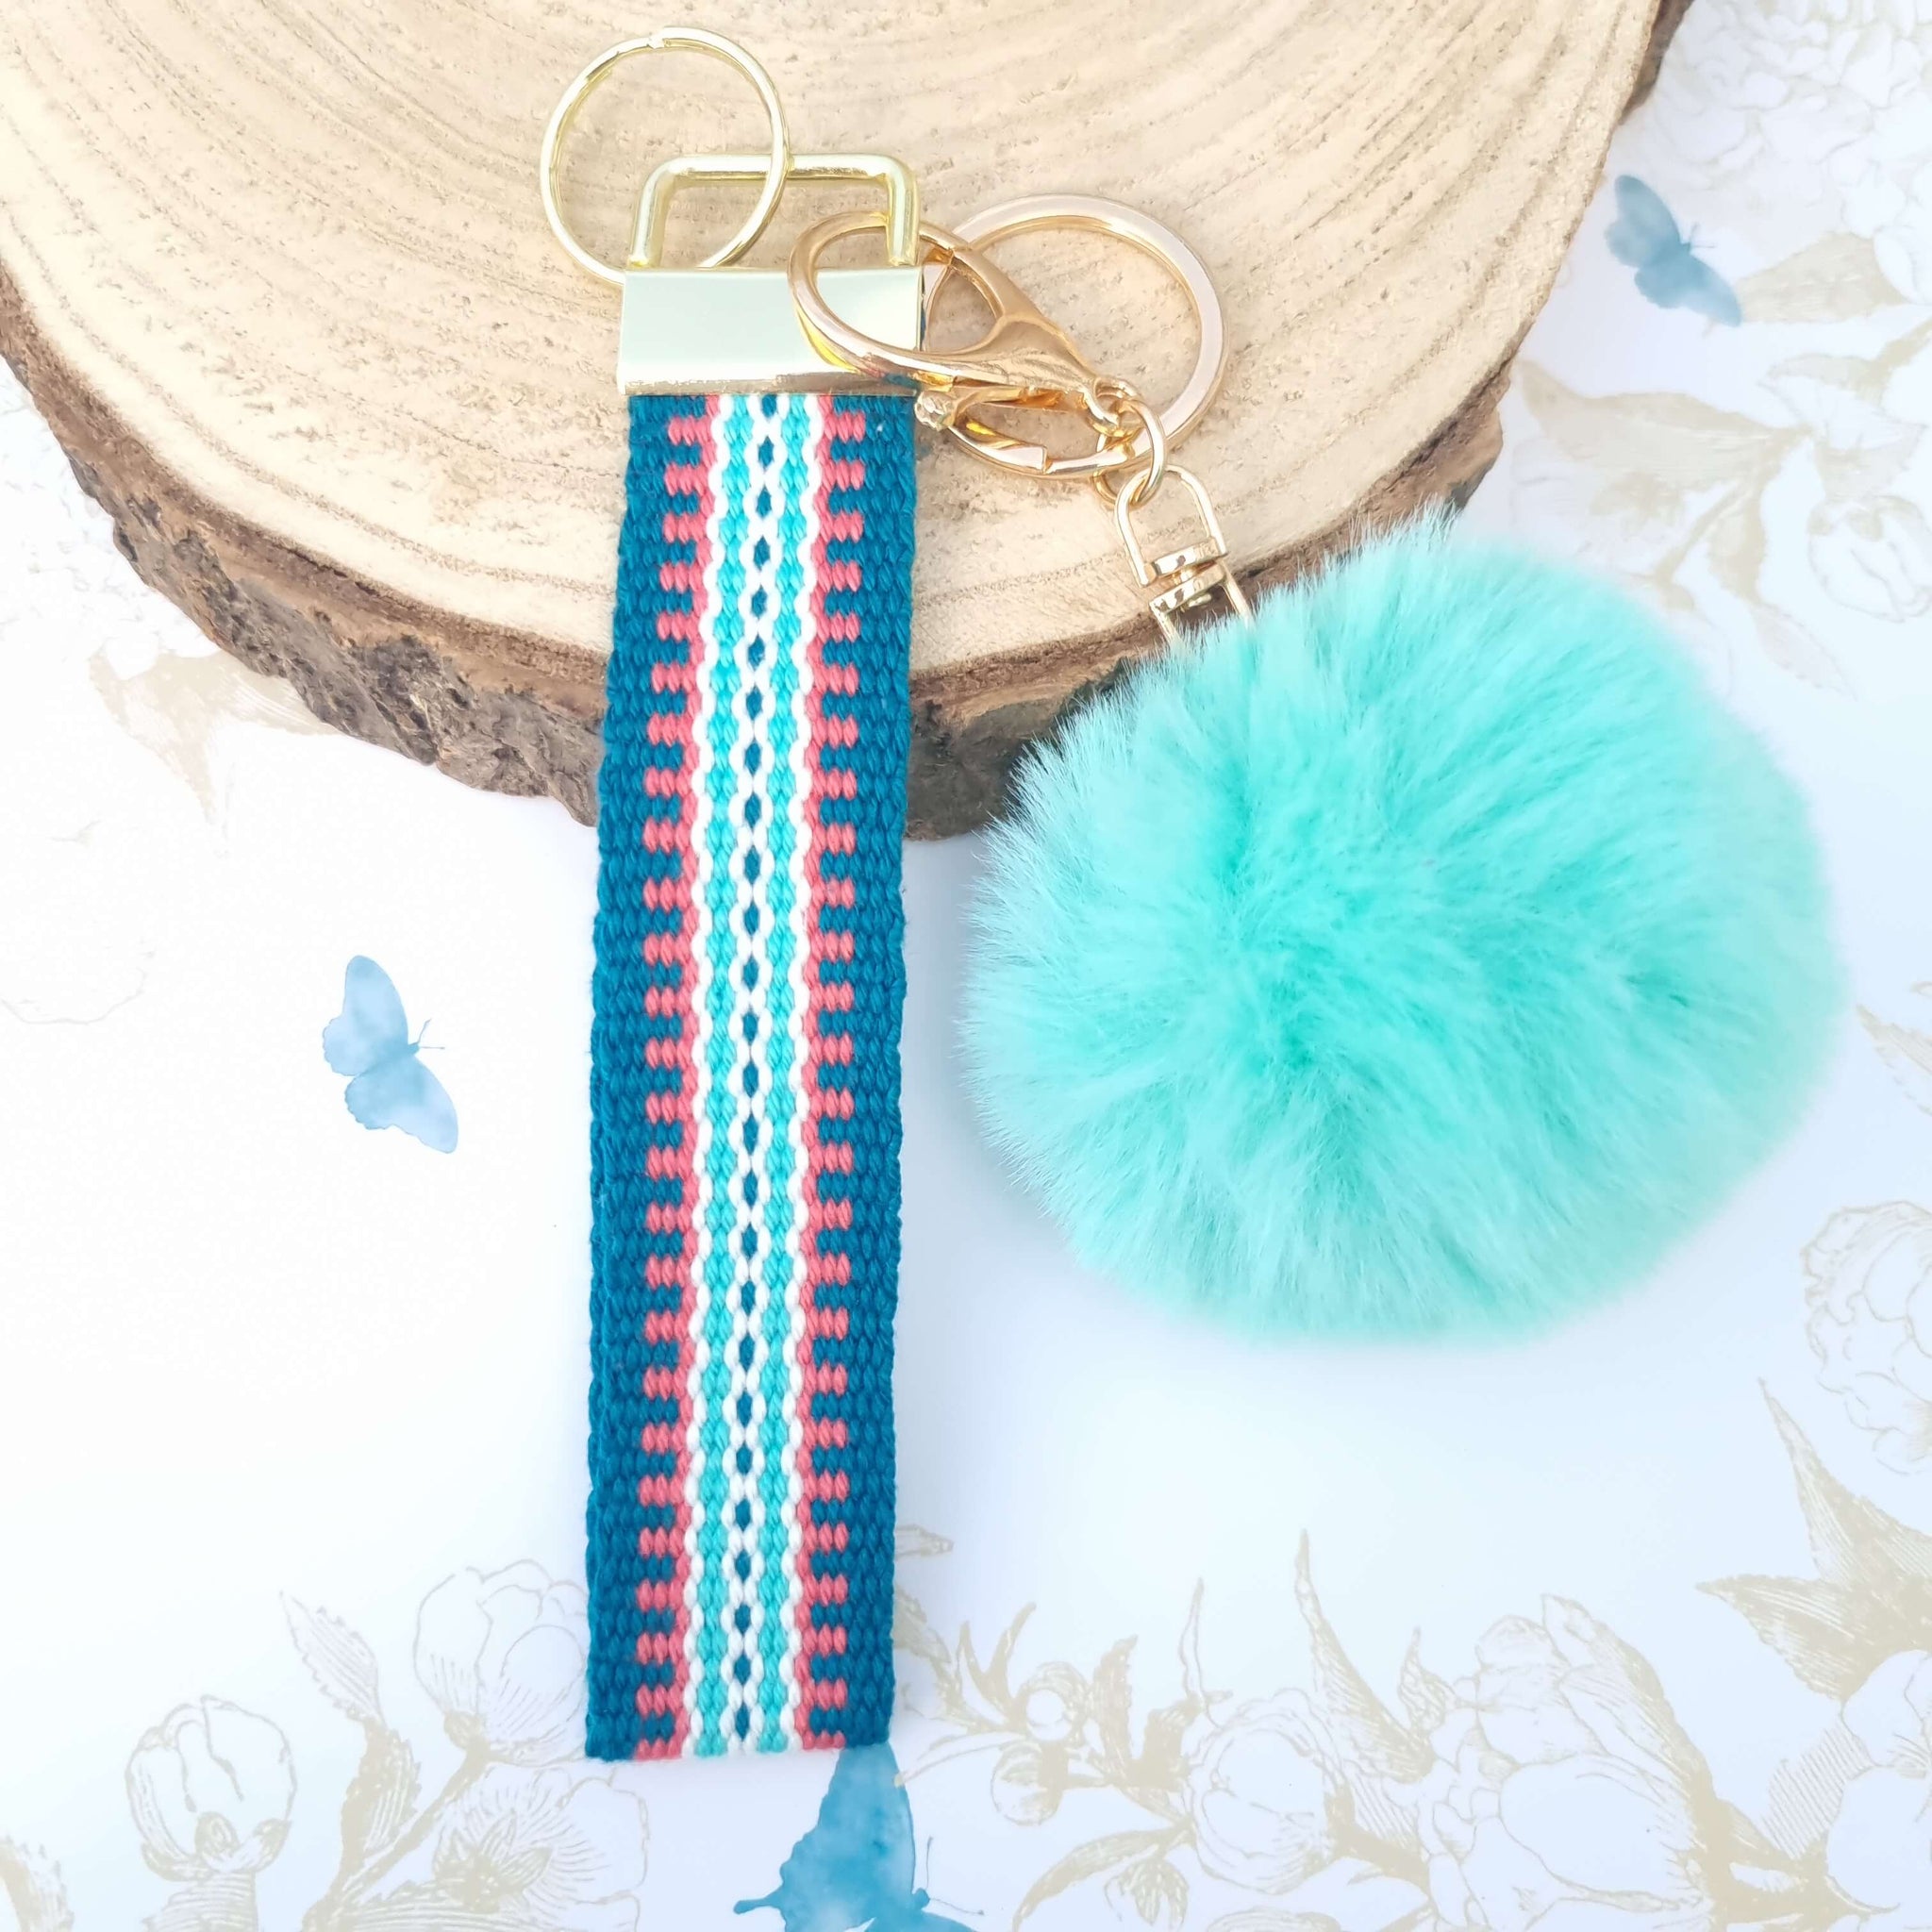 wrist lanyard in teal and green with pom pom